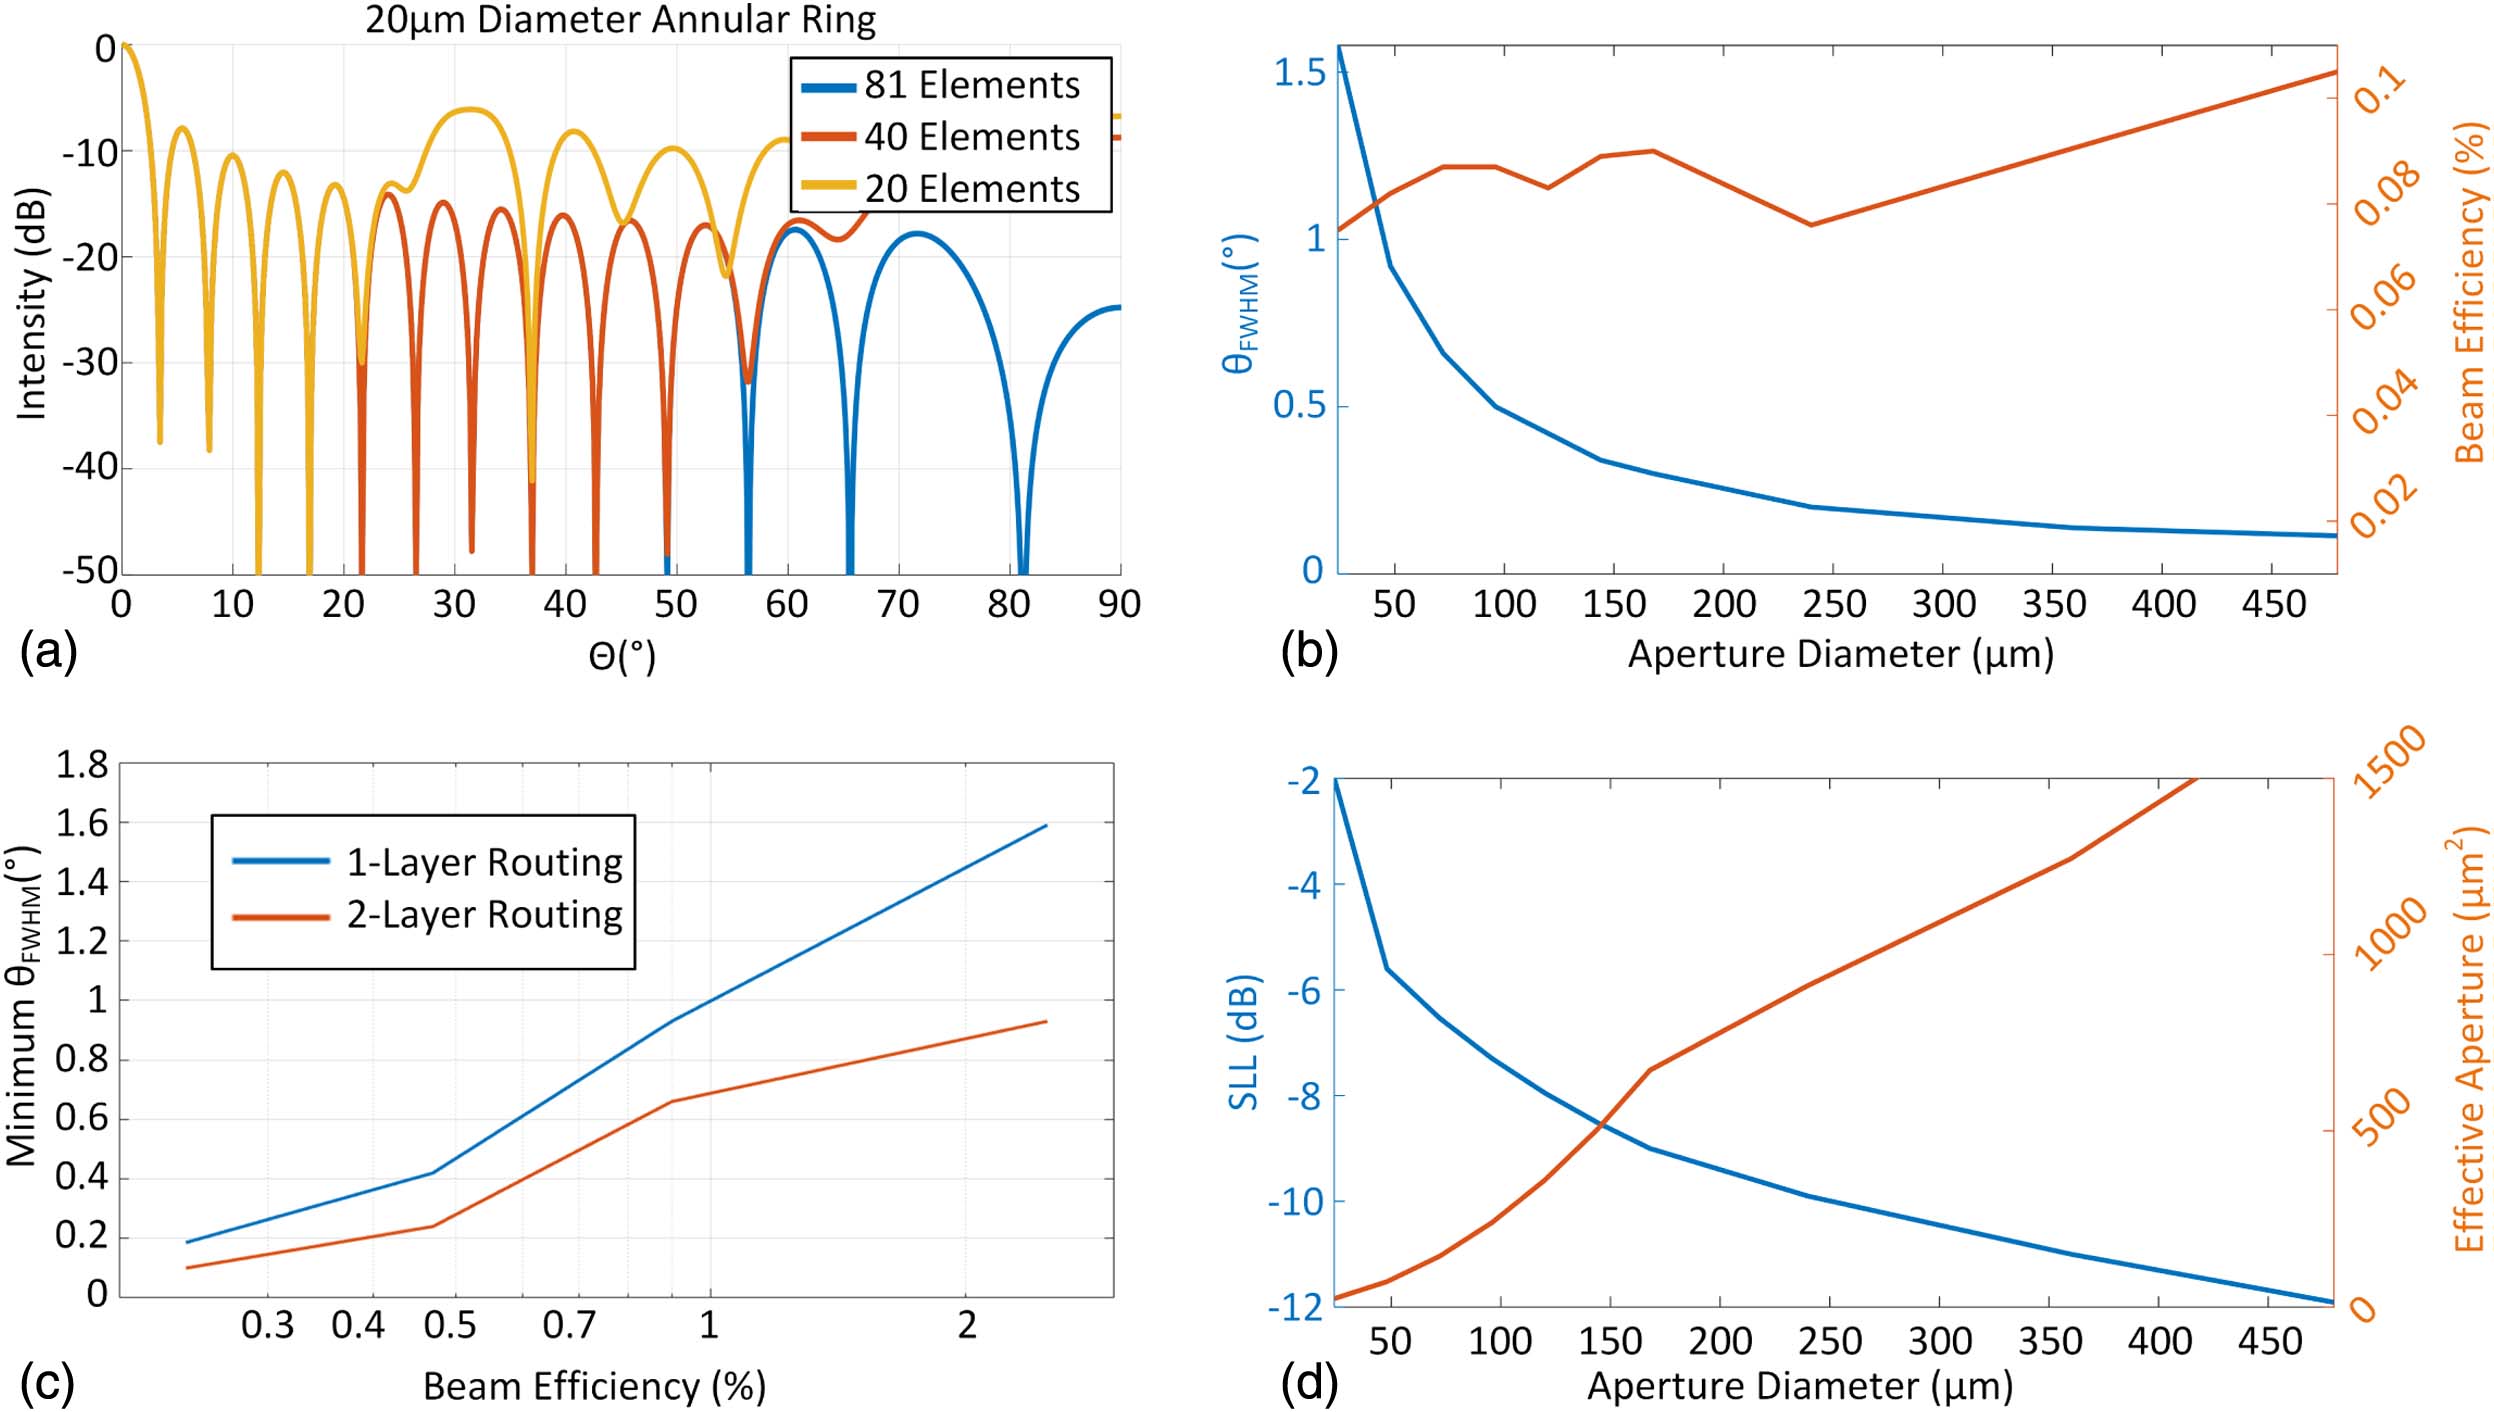 (a) Effect of annular-ring discretization on the far-field array factor. A 20 μm diameter ring is plotted for a continuous annular-ring-slit aperture (or half wavelength-spacing elements), discretized with 40 isotropic radiators and 20 isotropic radiators. (b) Beamwidth and 3 dB beam efficiency trends as a function of phased array aperture diameter. (c) Minimum beamwidth as a function of 3 dB beam efficiency for linear density multi-annular-ring OPAs at the planar routing limits for single-layer and two-layer photonics process. (d) SLL and effective aperture as a function of aperture diameter.